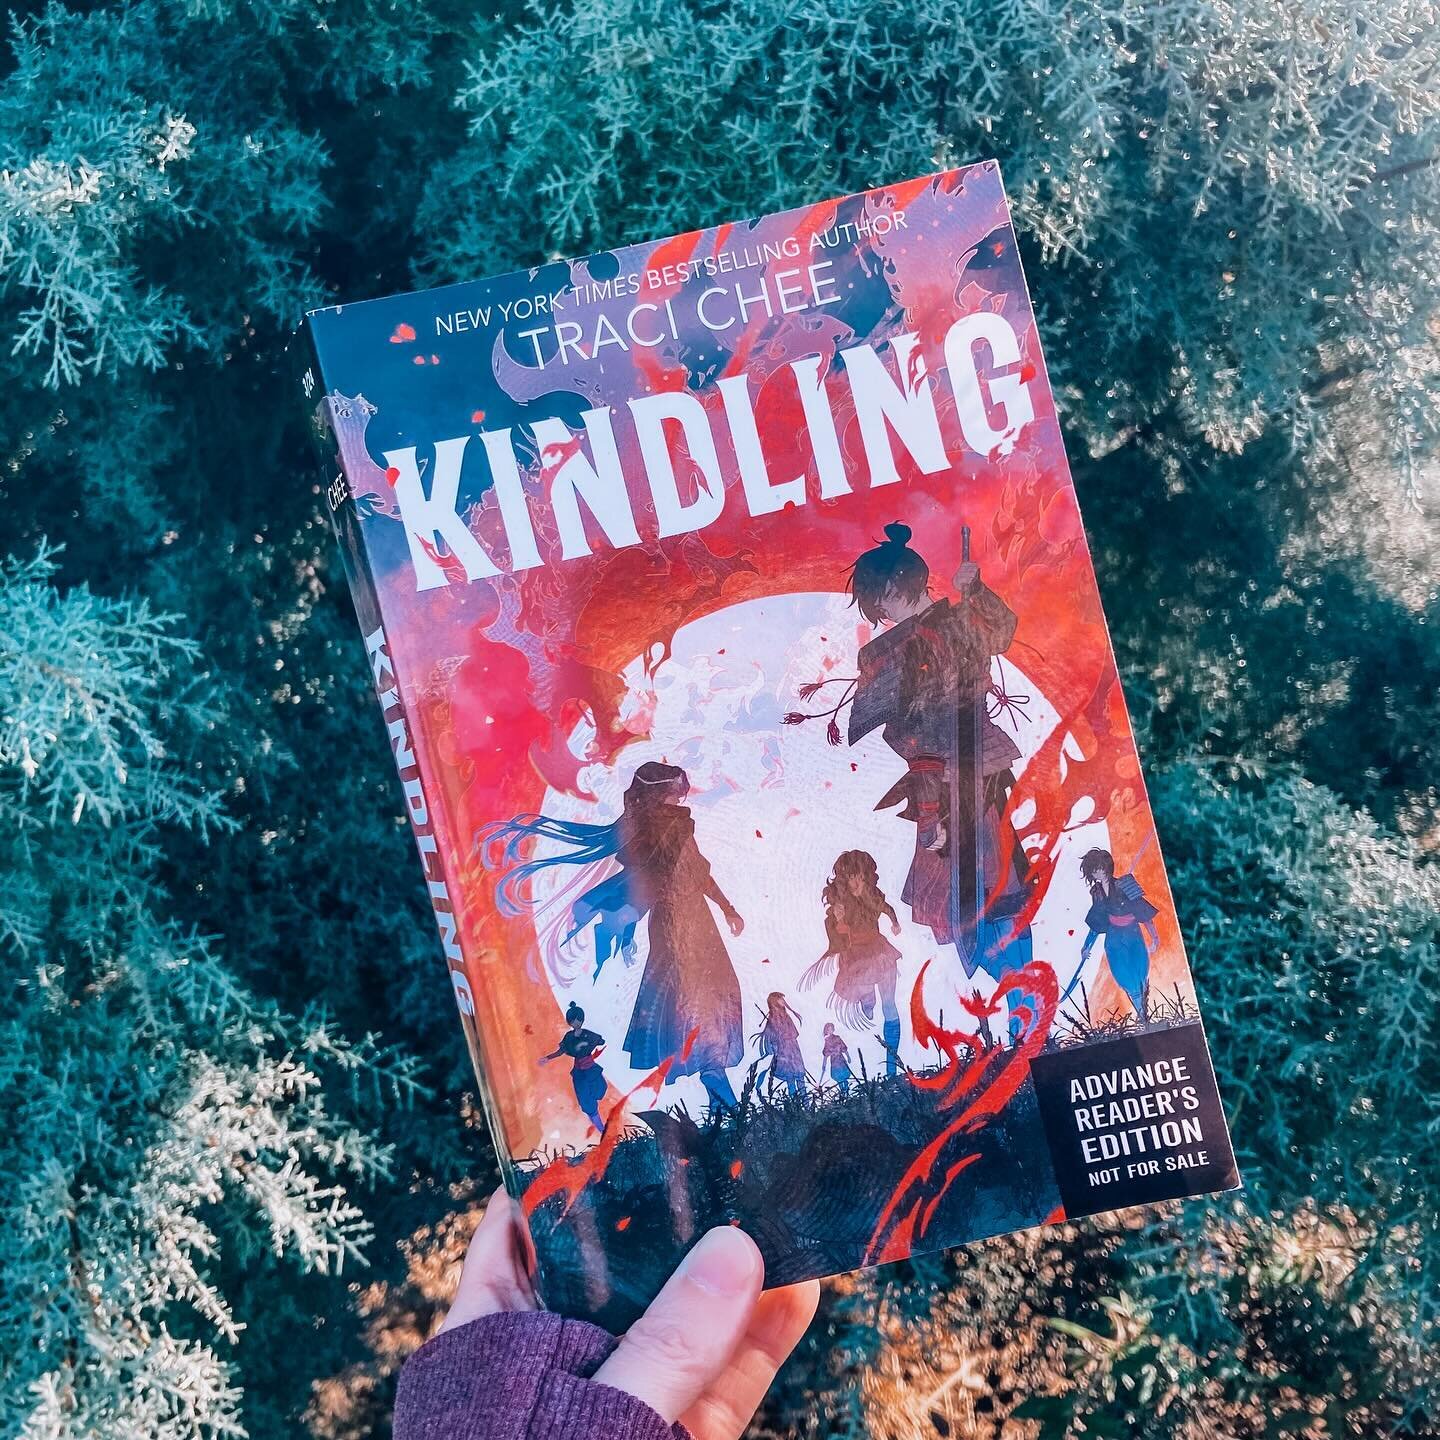 This stunner hit shelves today. 🔥 Kindling is gripping, heart wrenching, and beautiful. It tells the story of child warriors searching for purpose after the end of a war fought with a magic that drained years of life from them. It&rsquo;s told from 